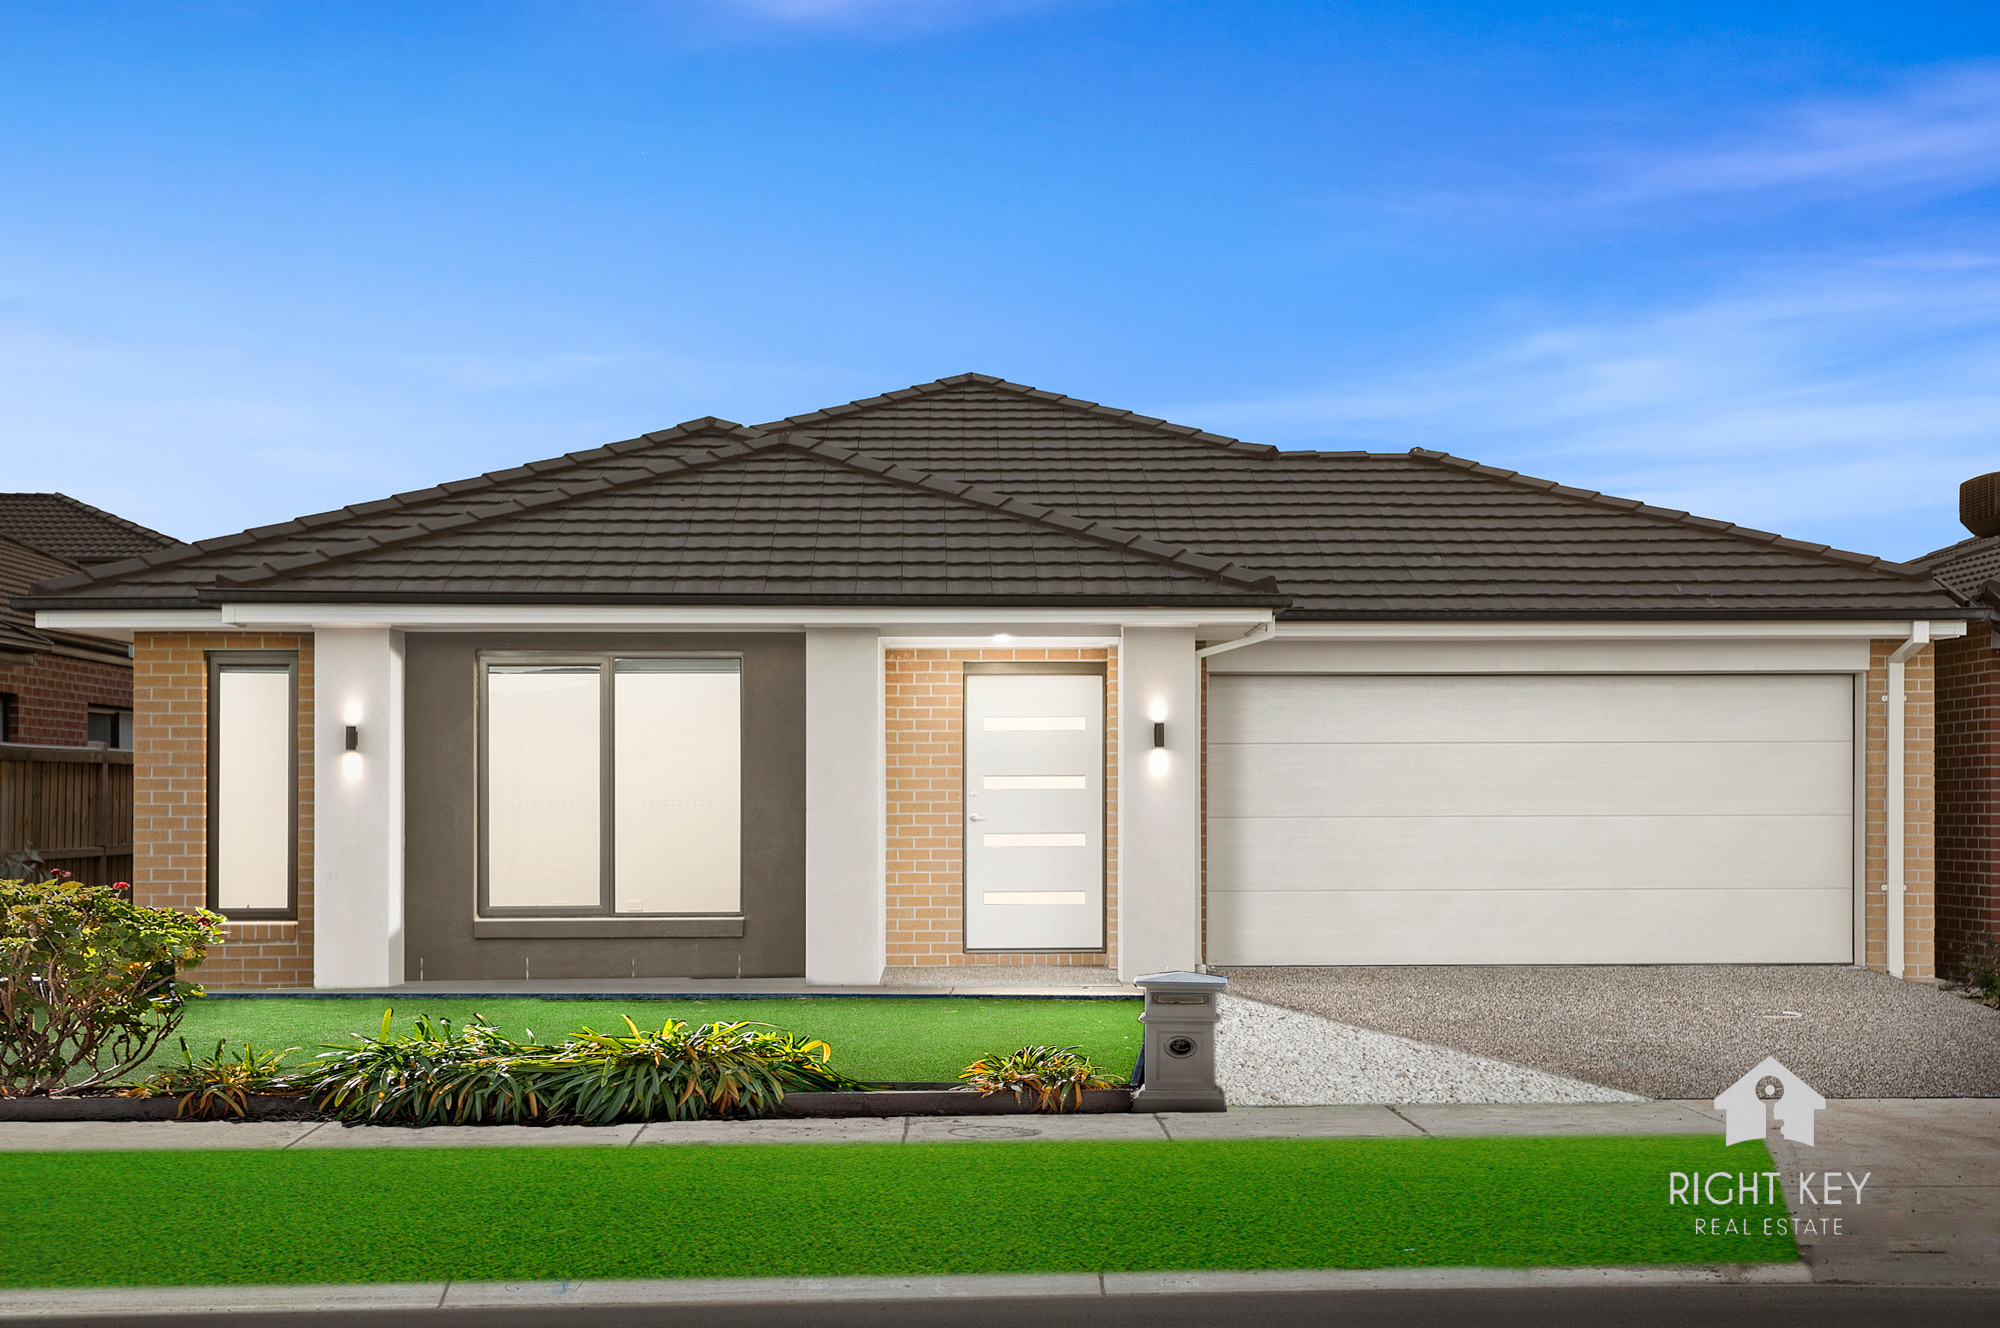 Beveridge 4chambre 4 Beds-Brand New House in Mandalay Estate, Donnybrook!!